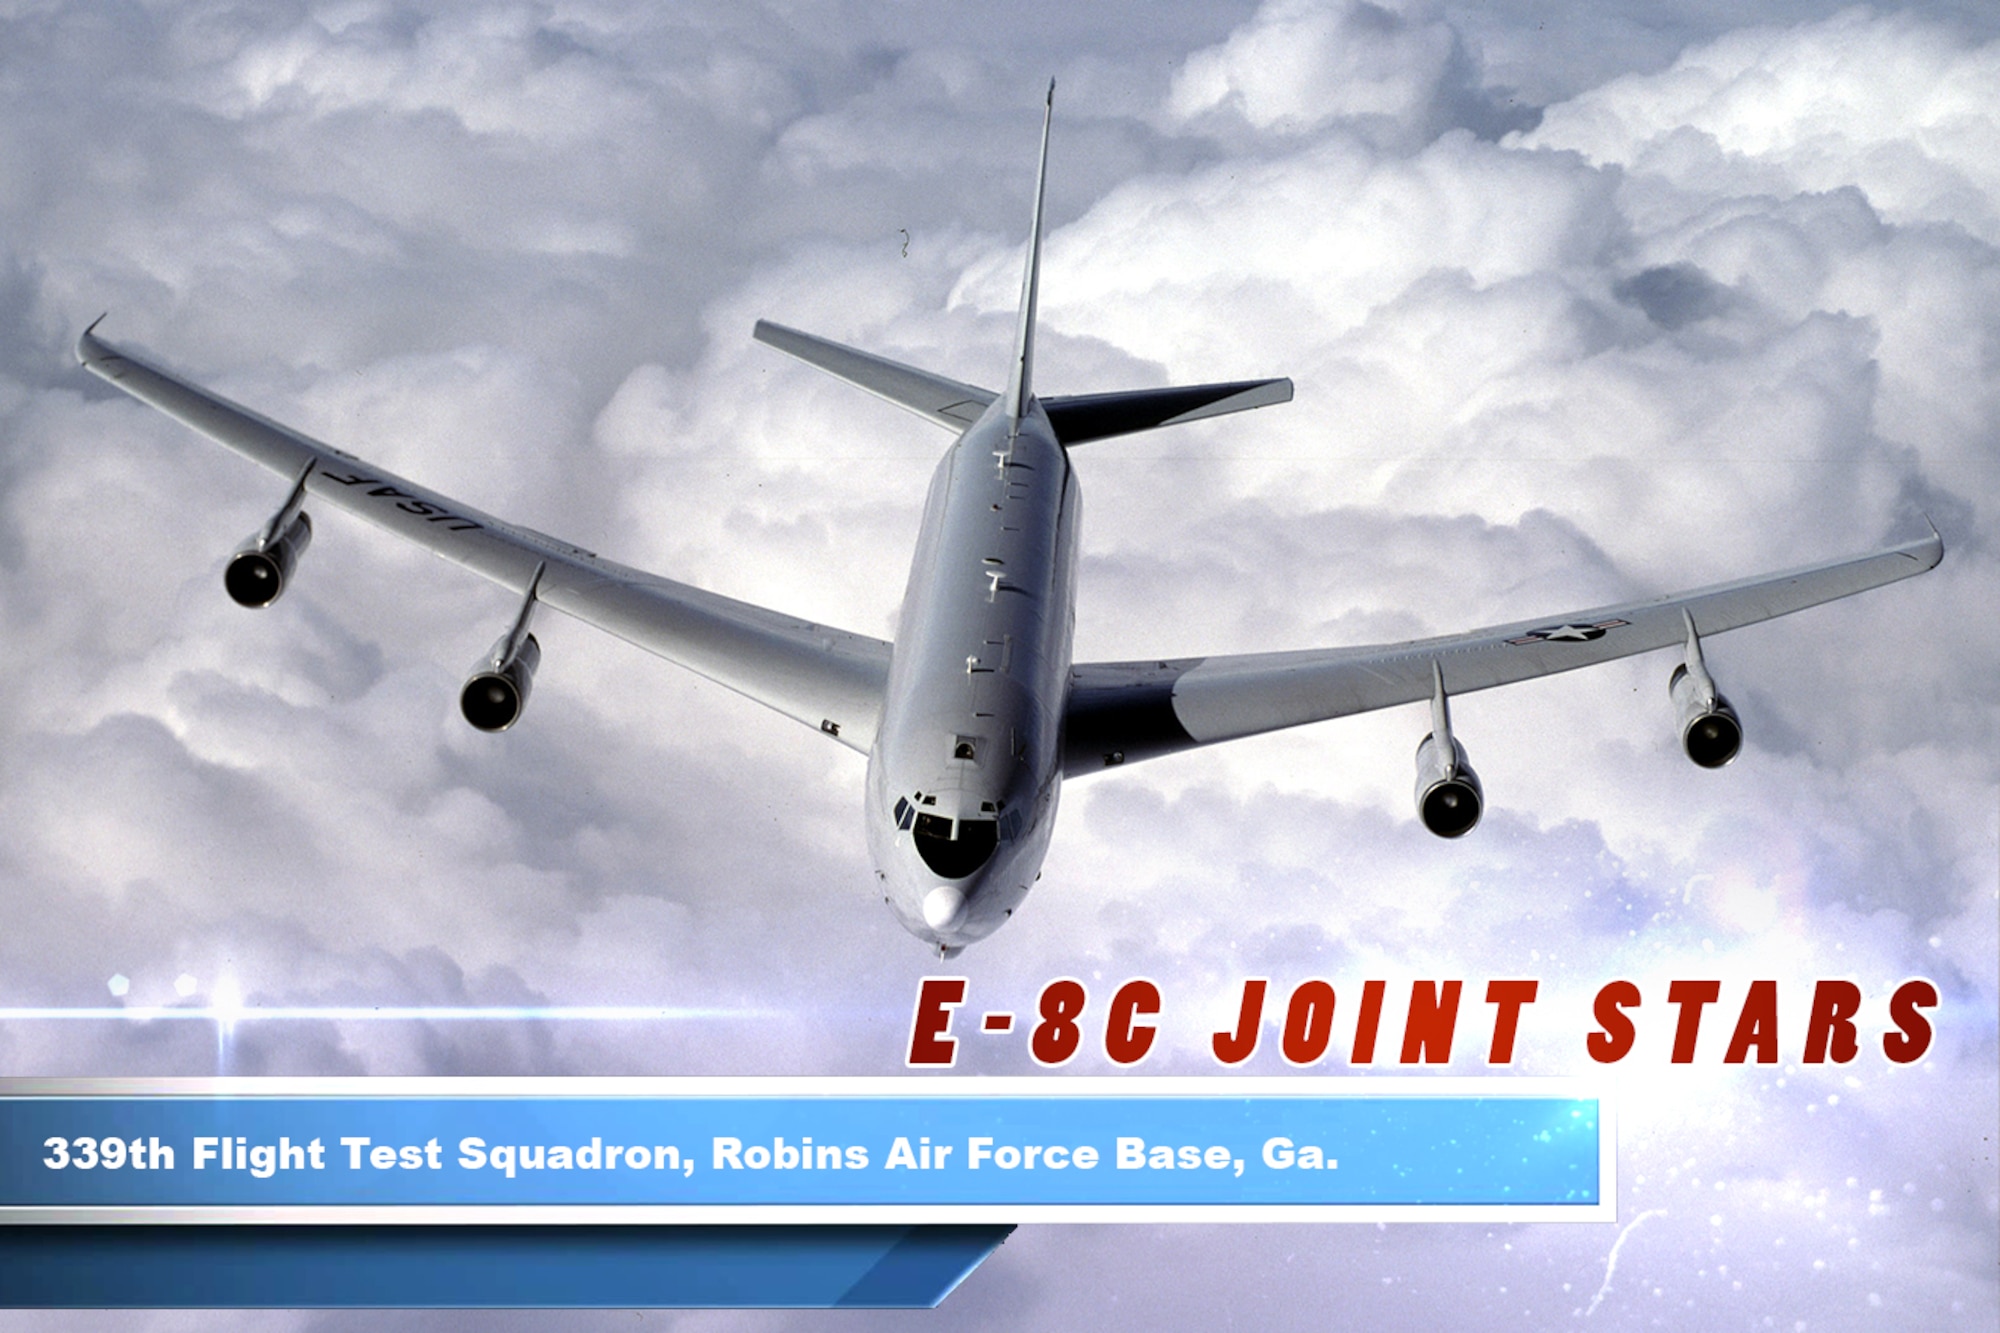 The E-8C Joint Surveillance Target Attack Radar System, or Joint STARS, is an airborne battle management, command and control, intelligence, surveillance and reconnaissance platform. Its primary mission is to provide theater ground and air commanders with ground surveillance to  support attack operations and targeting that contributes to the delay, disruption and destruction of enemy forces.